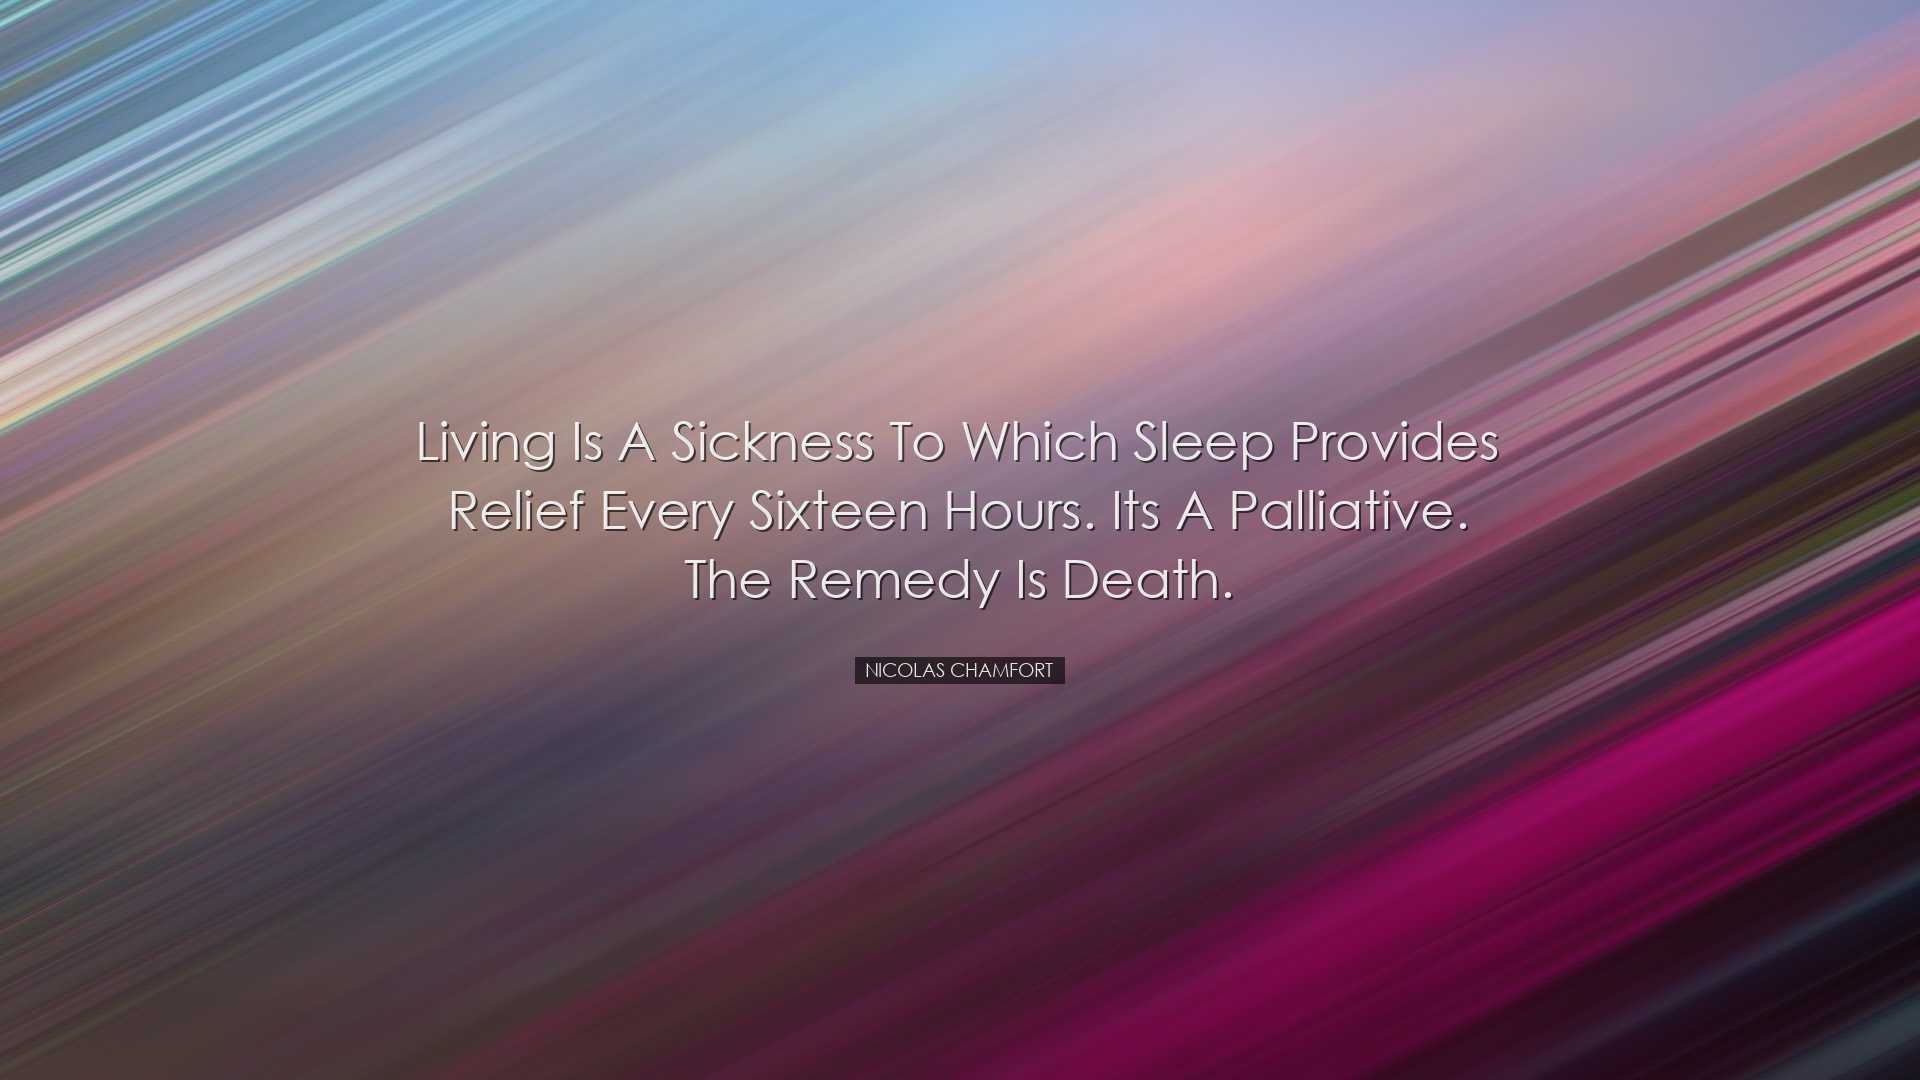 Living is a sickness to which sleep provides relief every sixteen